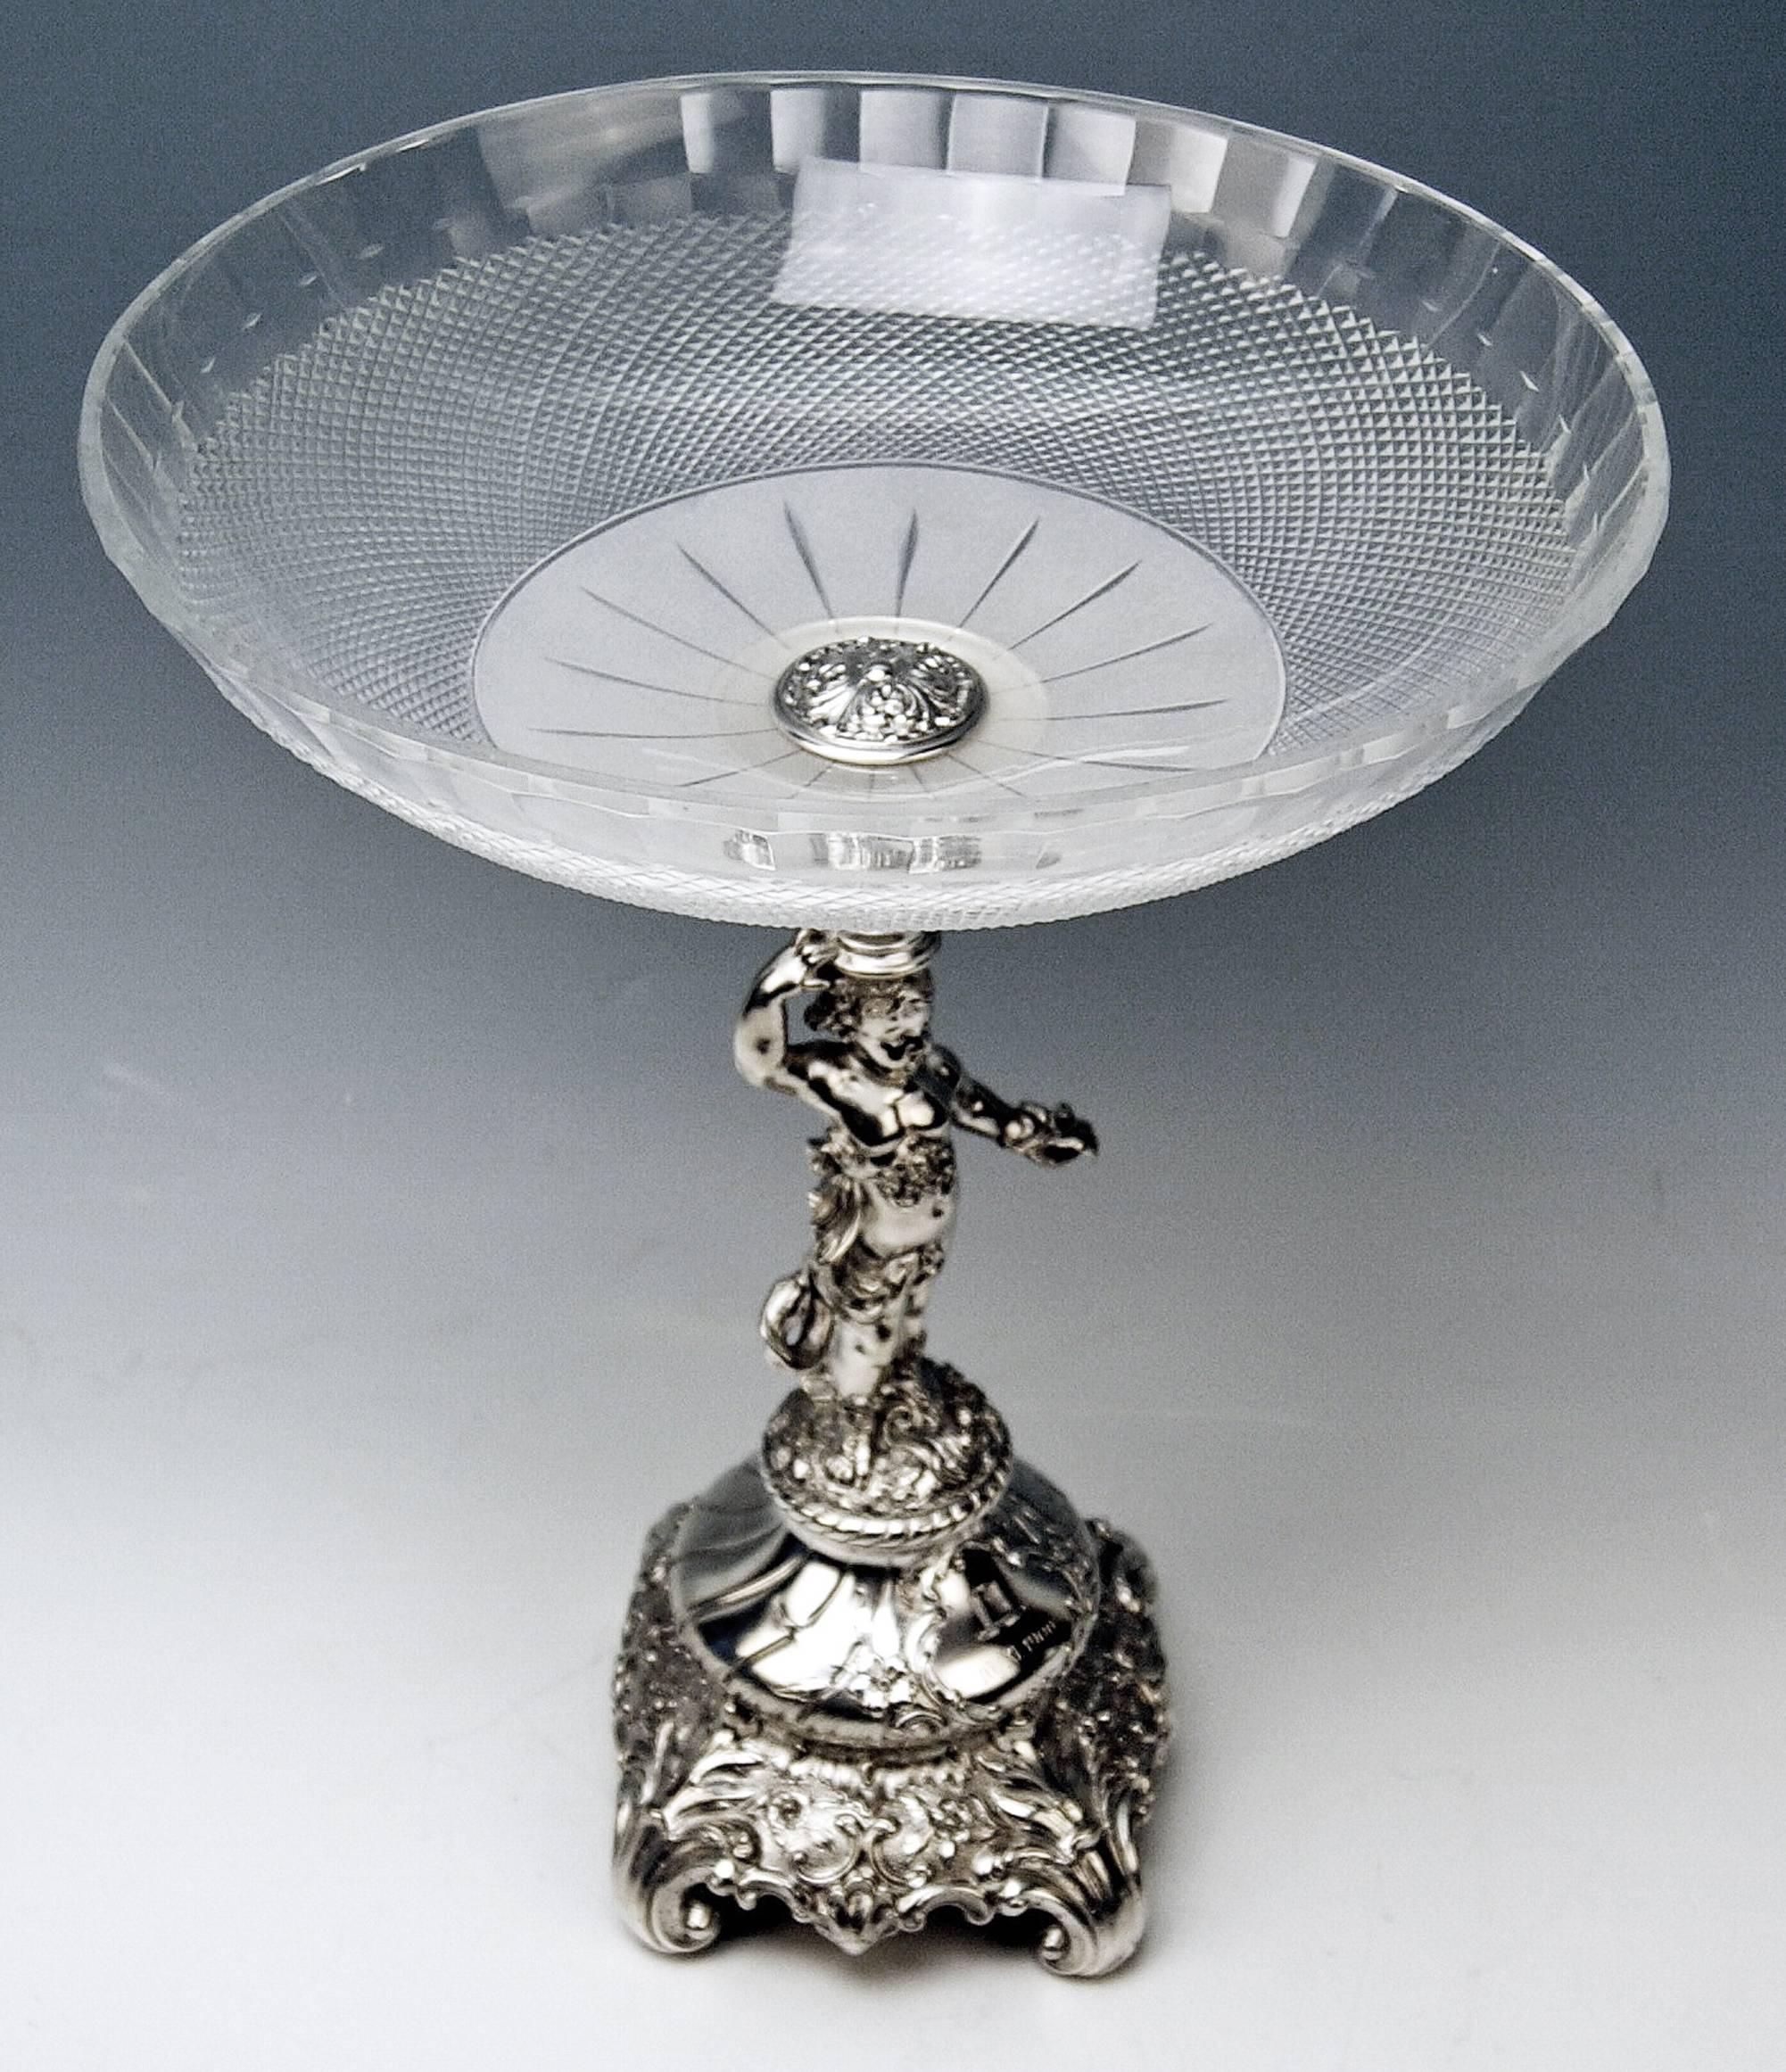 Silver Austrian tall centrepiece made in style of Historicism with original round glass platter.
Dedication visible: A topper/high hat, beneath it there is a date engraved, 10/XI 1900 which means 11-10-1900.

The stalk of centrepiece is